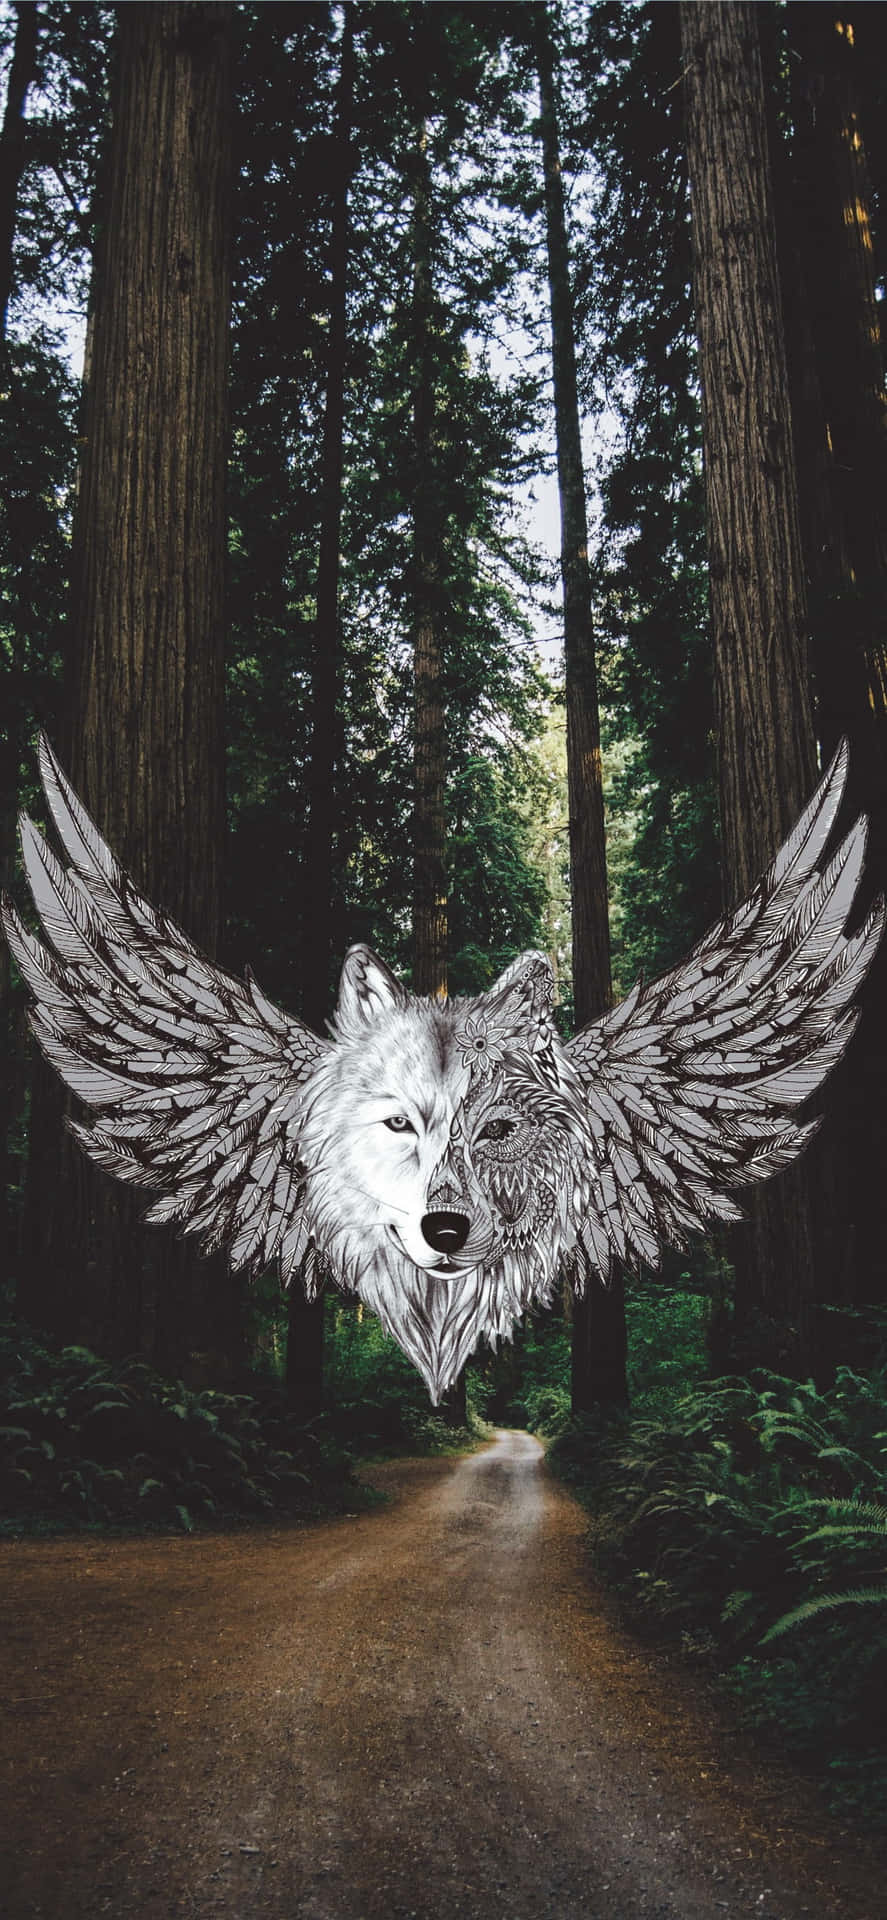 "A powerful and majestic Winged Wolf takes flight" Wallpaper